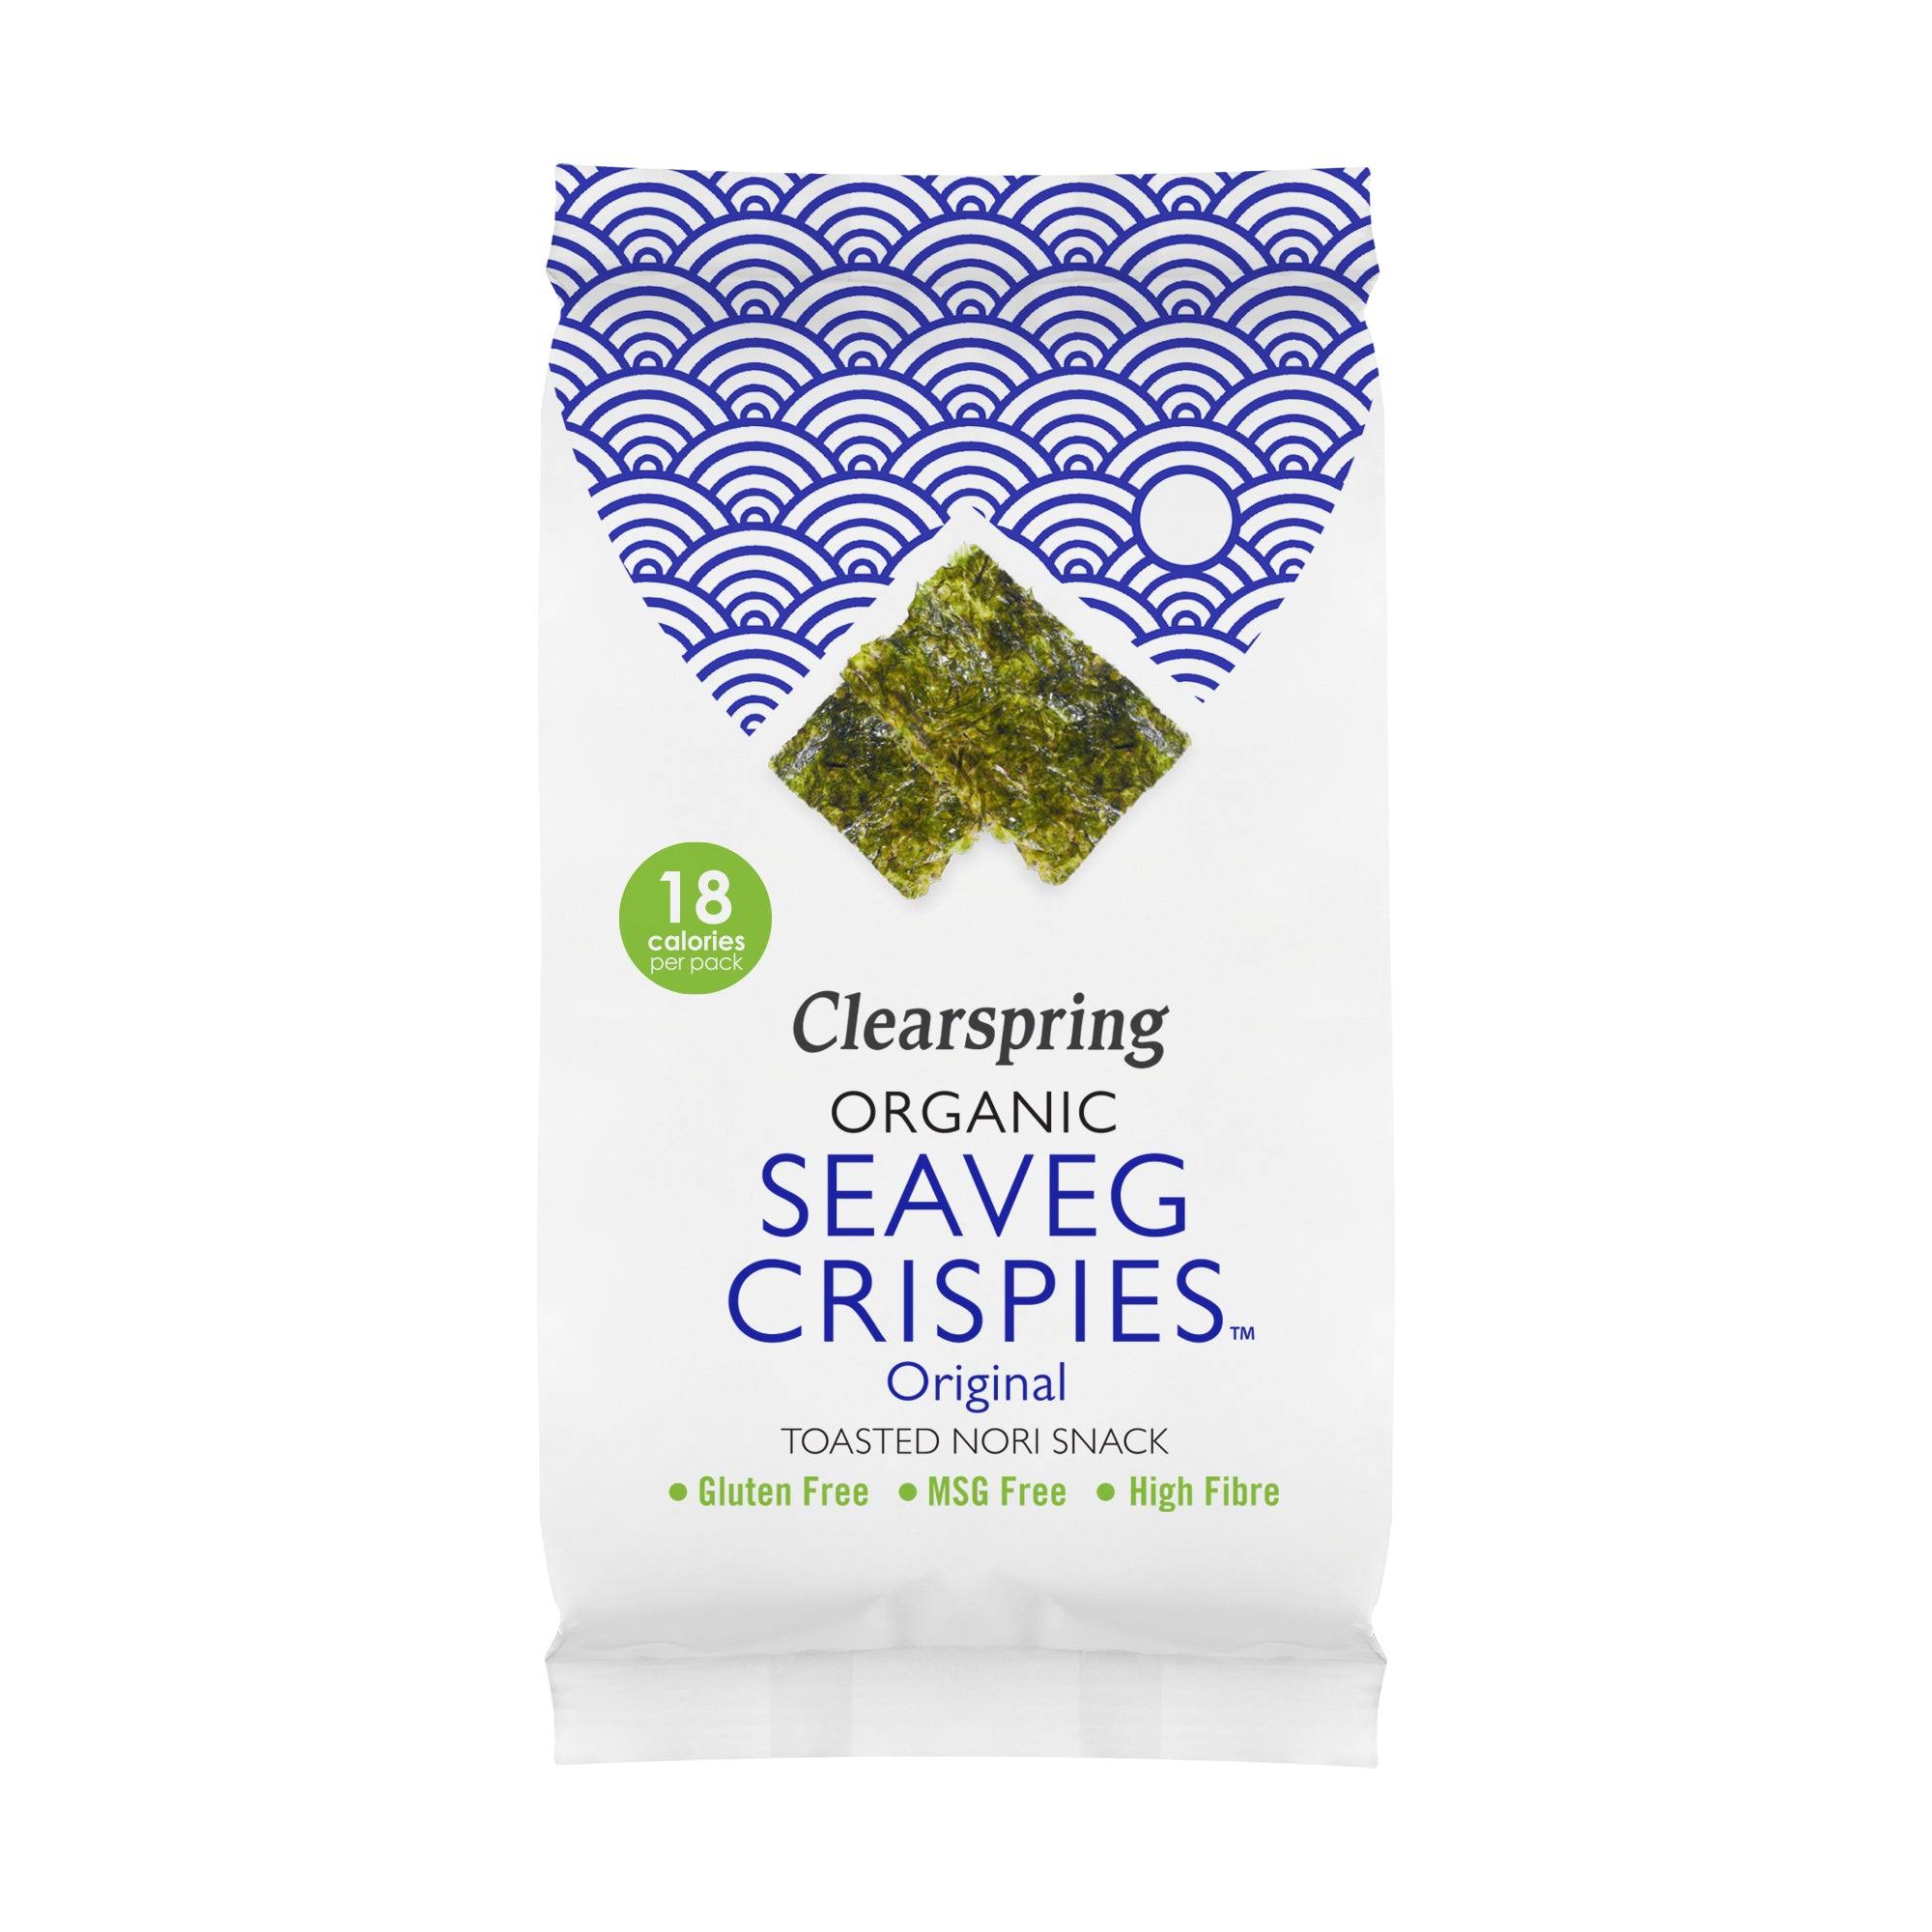 Clearspring Organic Seaveg Crispies Toasted Nori Snack - Ginger